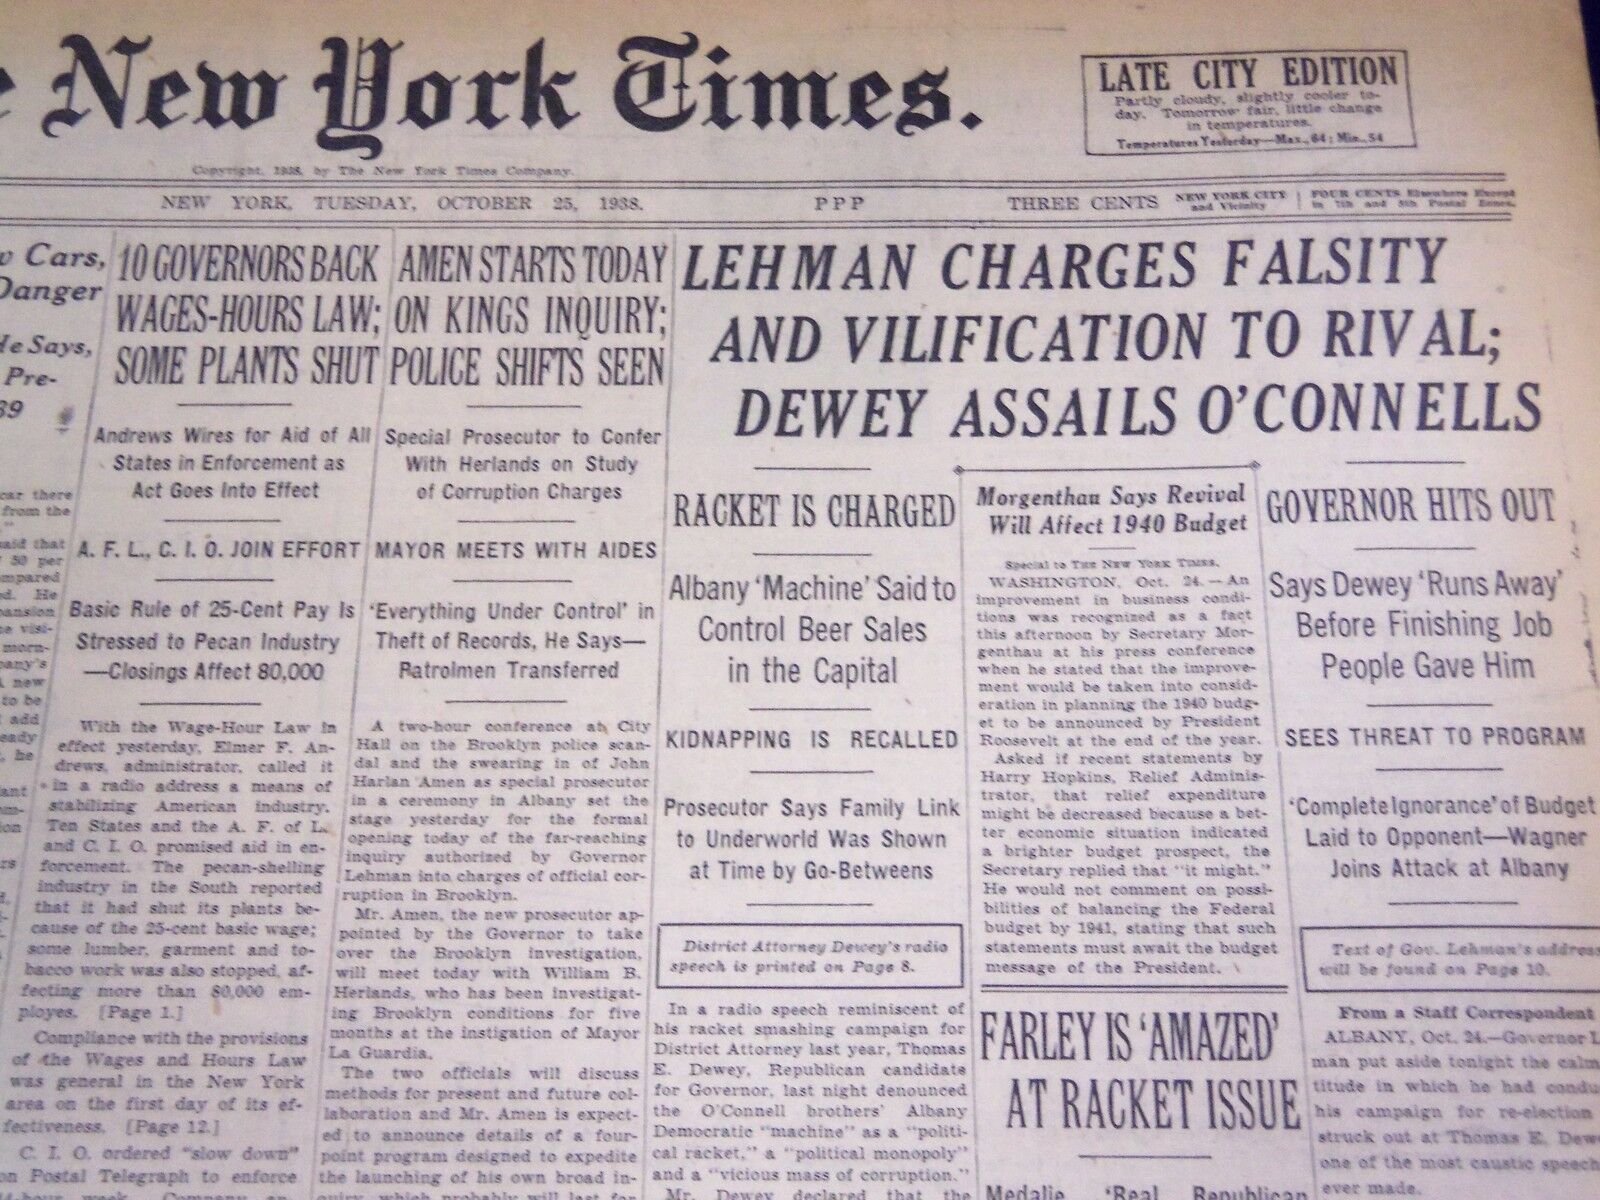 1938 OCT 25 NEW YORK TIMES - LEHMAN CHARGES FALSITY & VILIFICATION RIVAL- NT 699